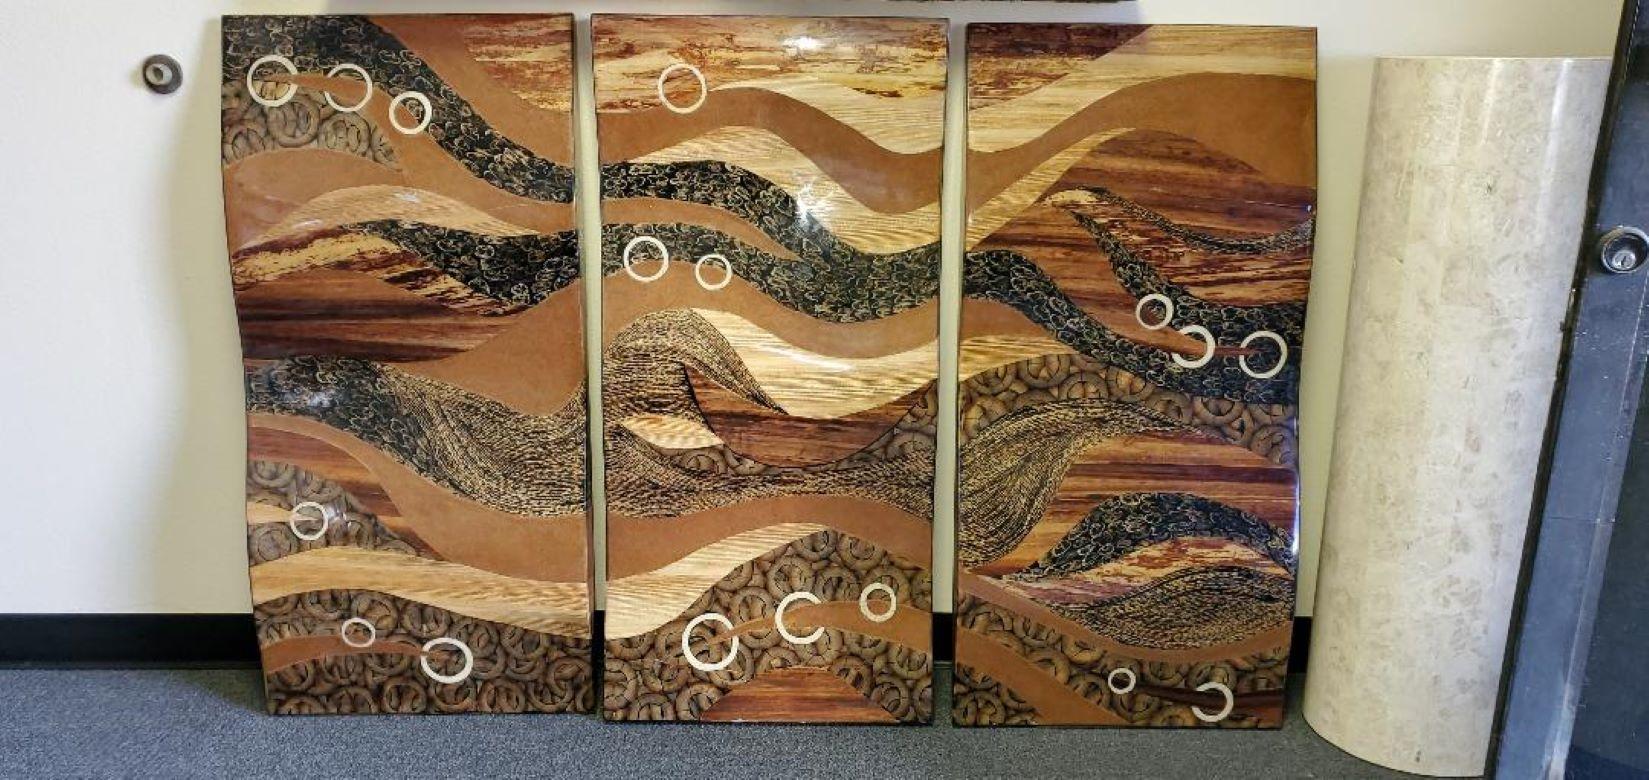 Marquis Collection Of Beverly Hills Three Piece wall sculpture.

Three Piece Collage Wall Art Panels.

The Collage Has An Under The Sea Sort Of Feel To It. The Beautiful Colors Of Different Browns and Beiges And Cream Colors And A Hint Of Blacks